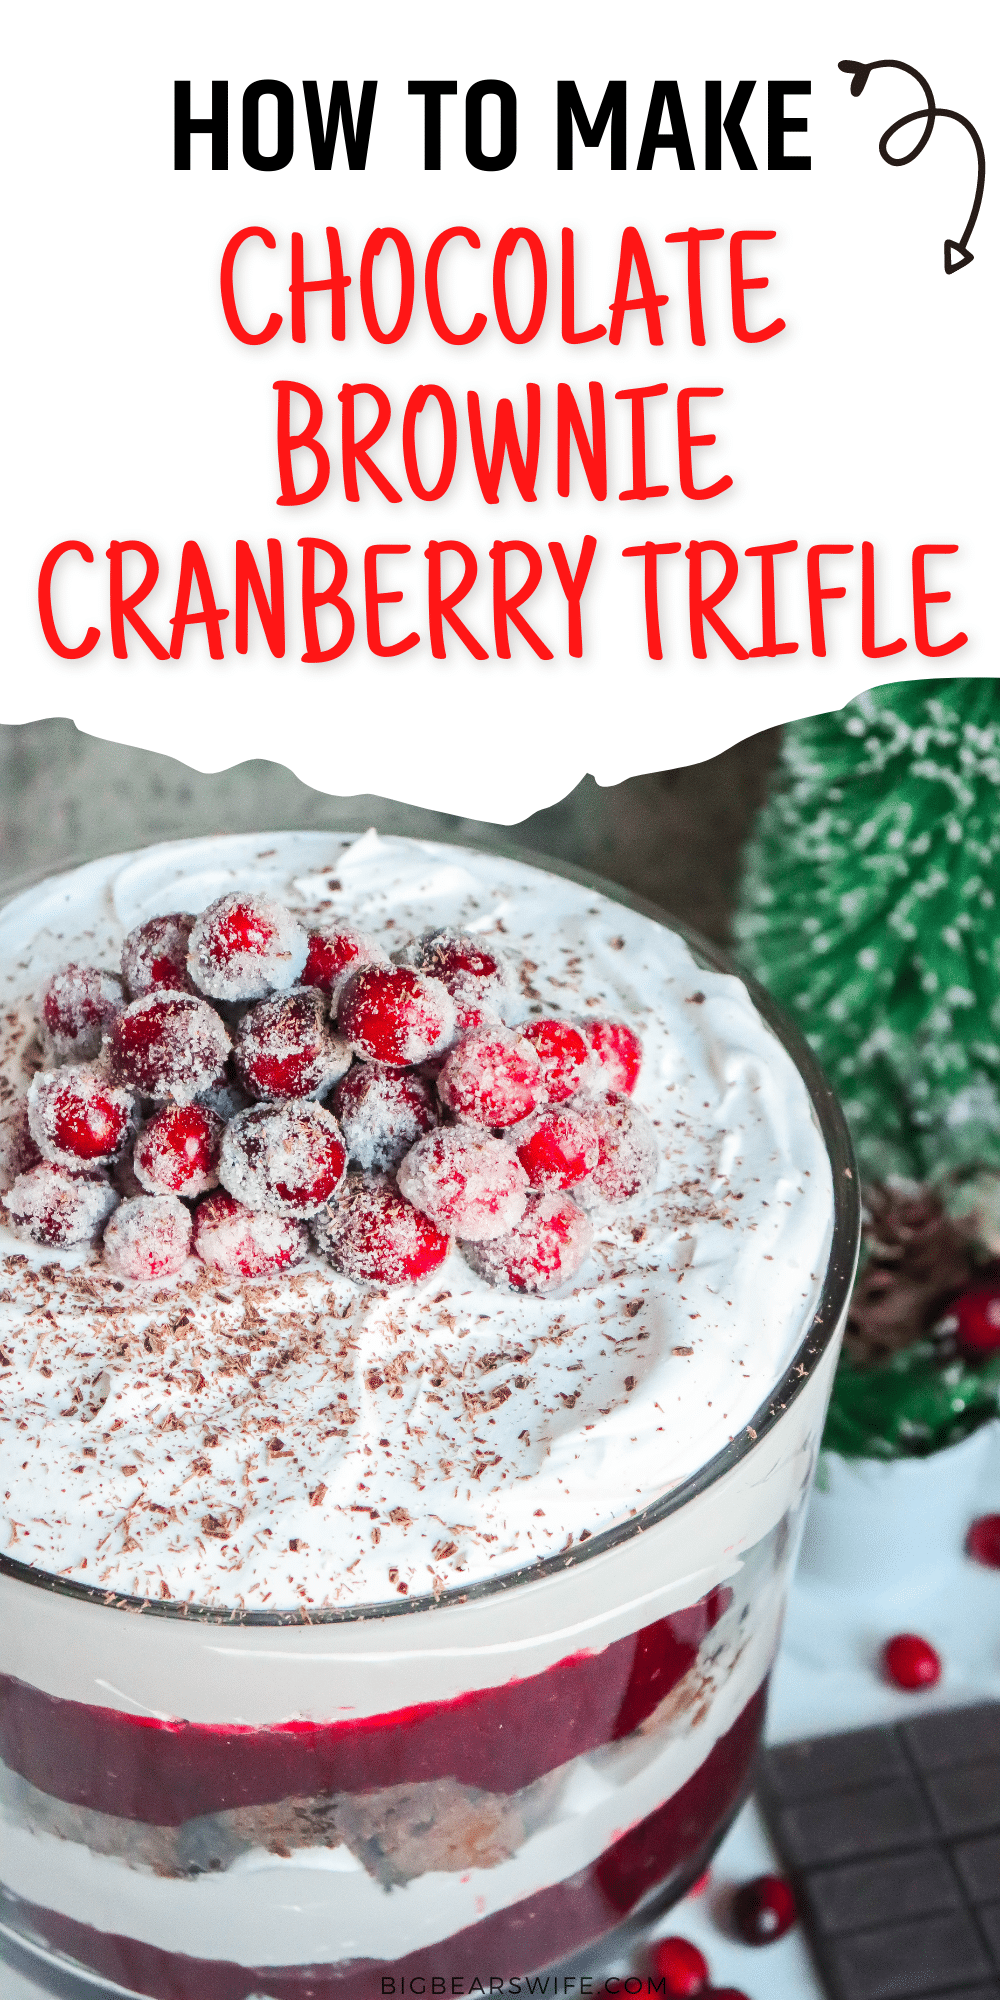 Chocolate Brownie Cranberry Trifle - A beautiful holiday dessert with layers of homemade brownies, homemade cranberry sauce and whipped topping will be one of your favorite treats this holiday season!  via @bigbearswife